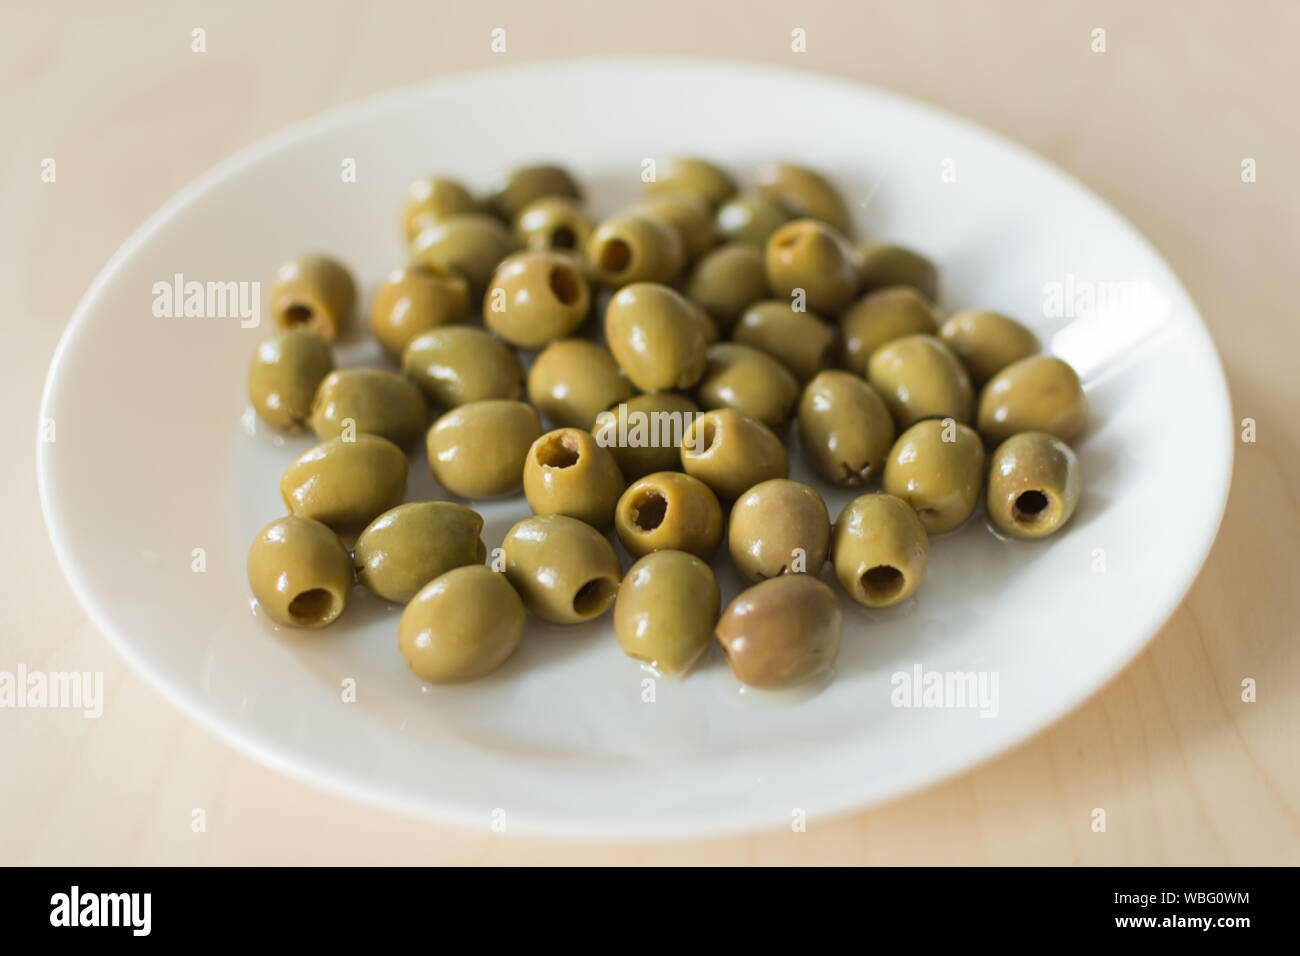 Pickled green olives in a plate on a white background Olives, healthy eating. Italian cuisine. Stock Photo